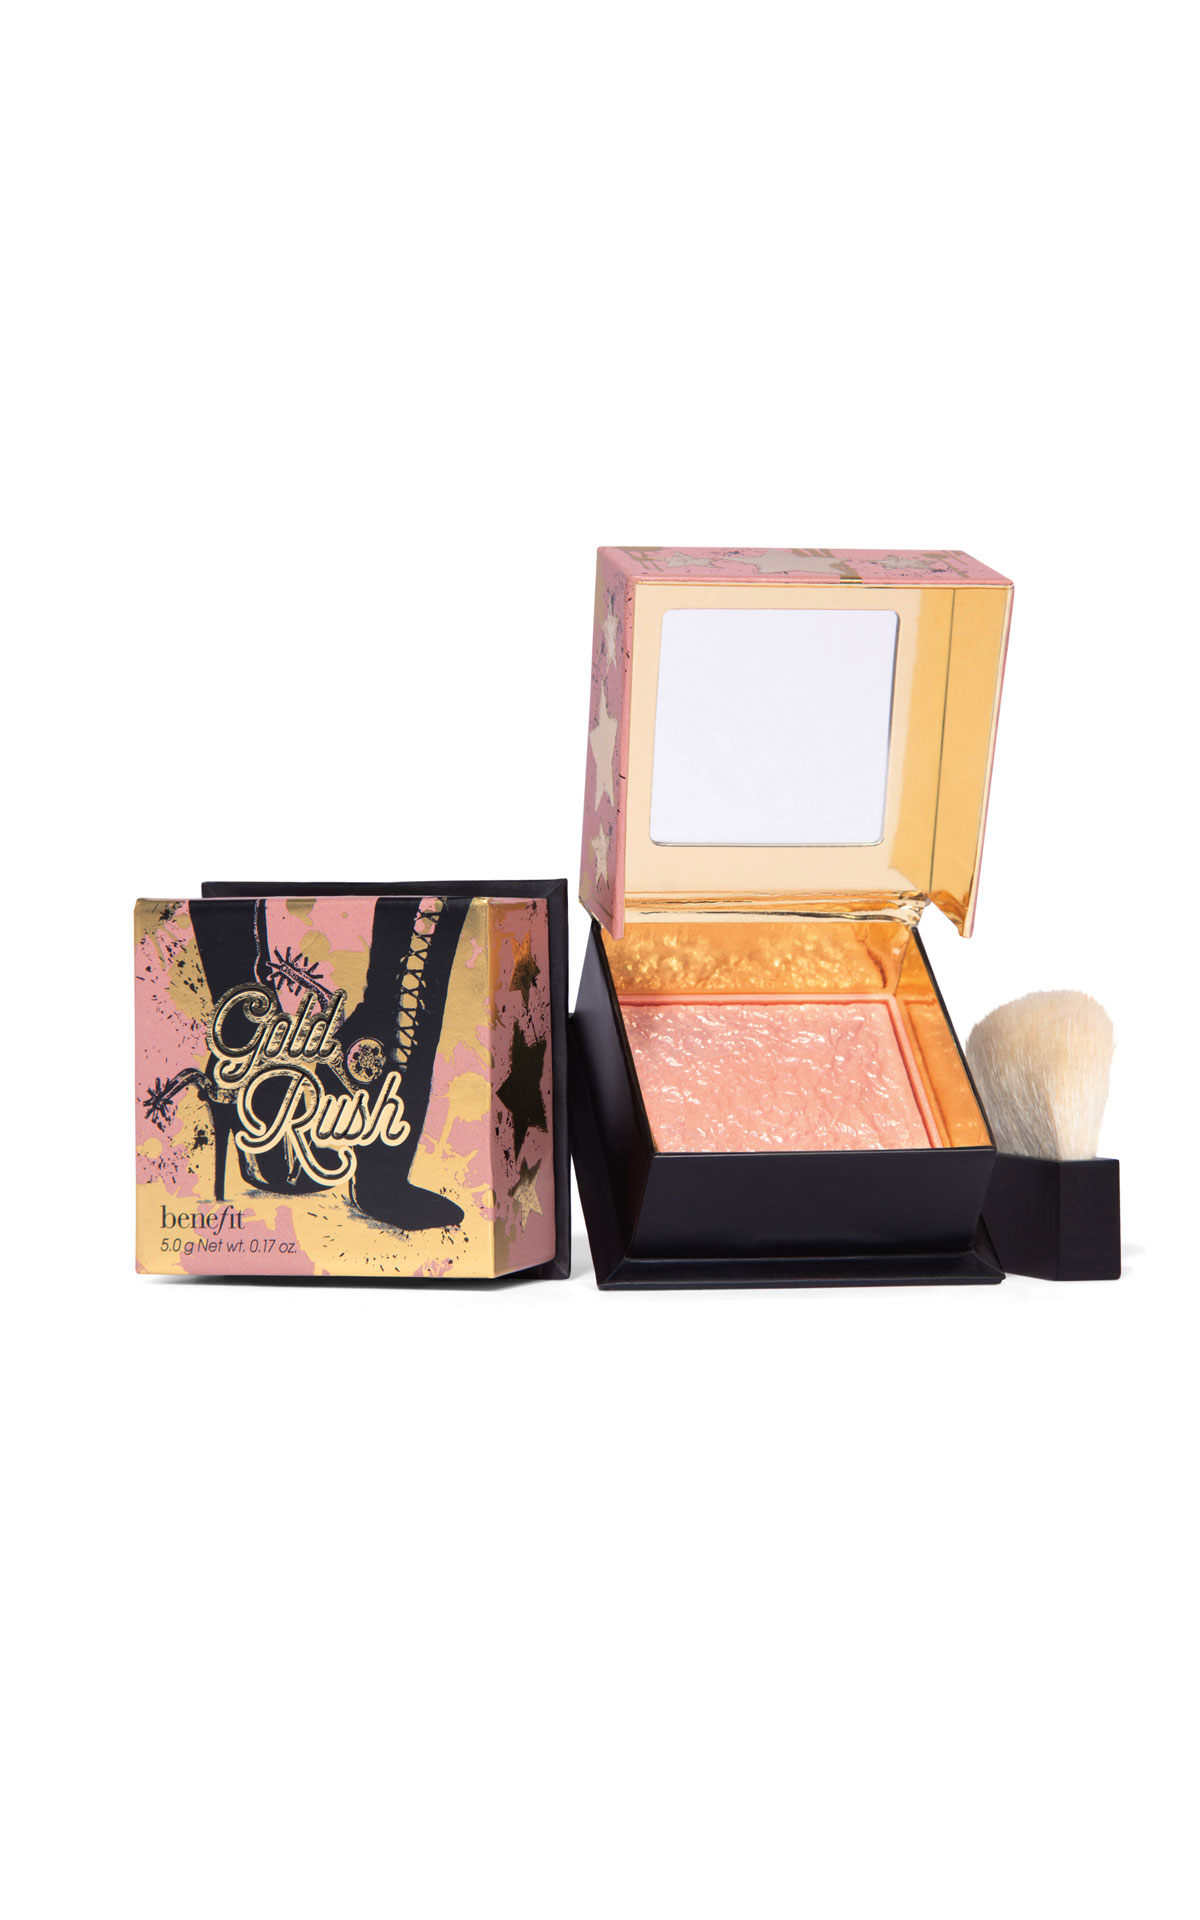 Benefit Goldrush from Bicester Village